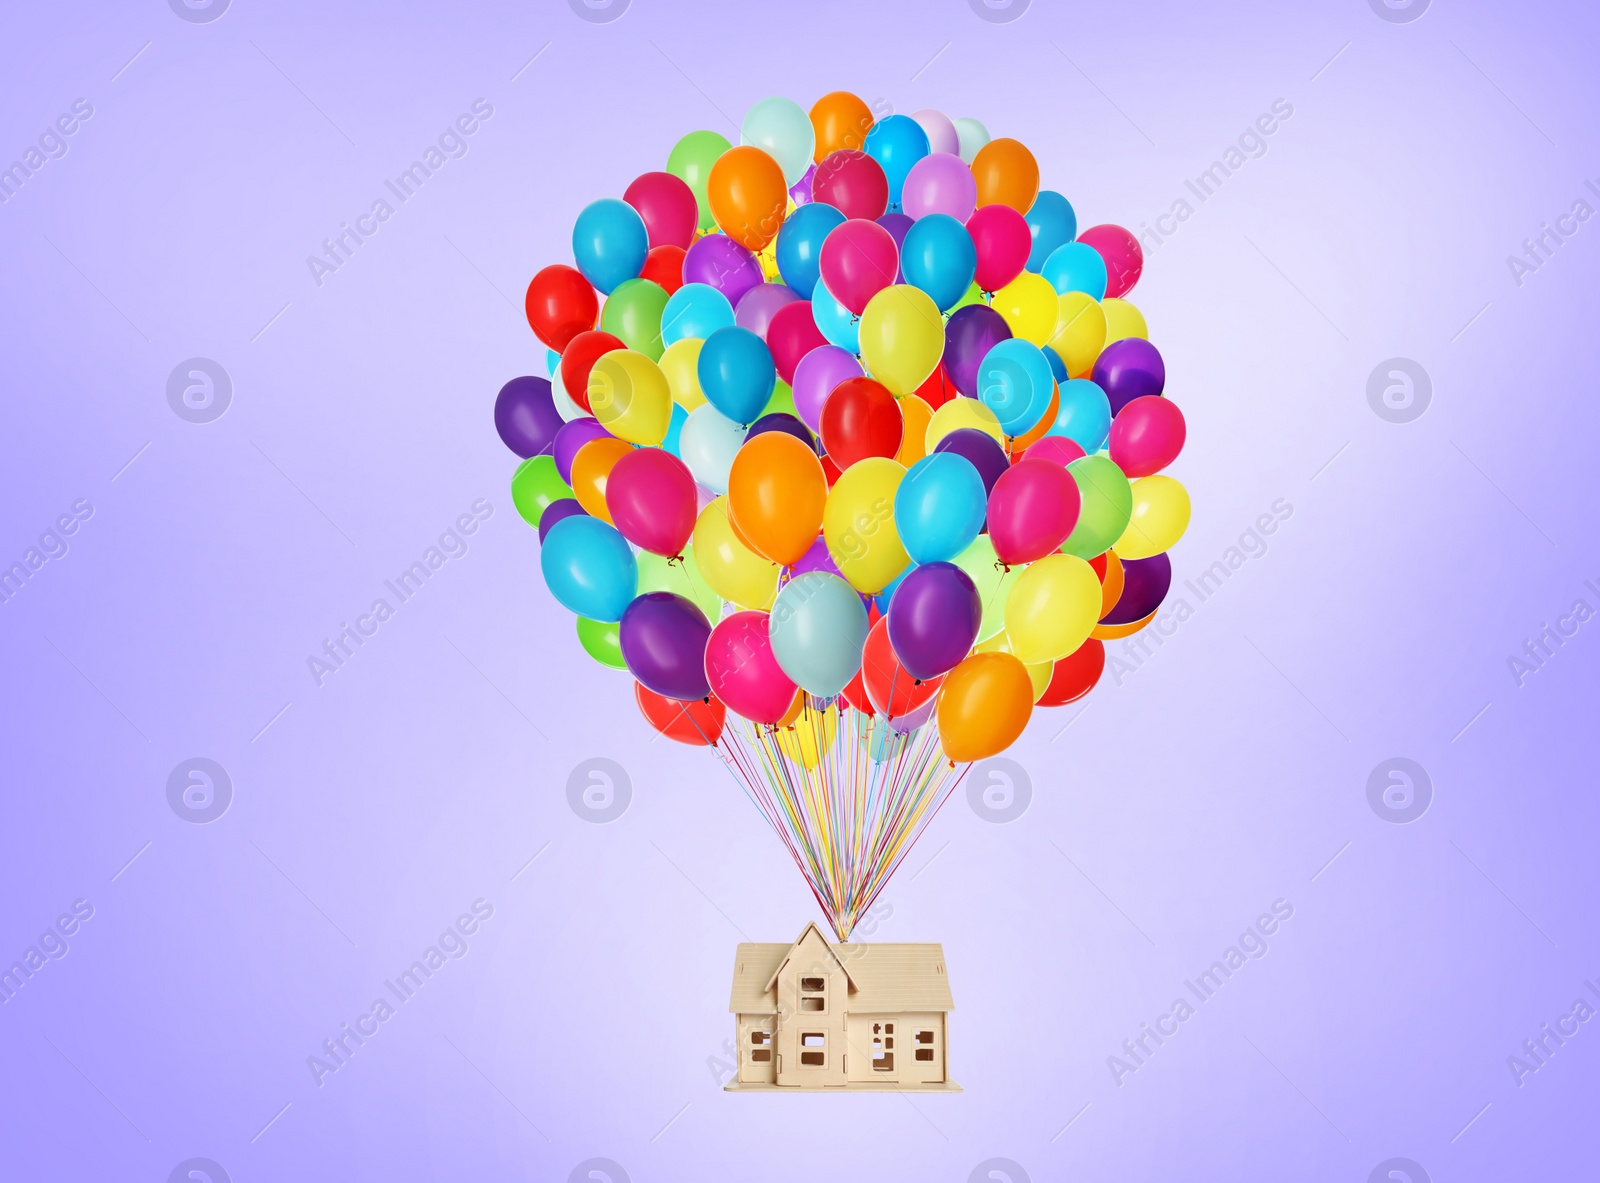 Image of Many balloons tied to model of house flying on violet background